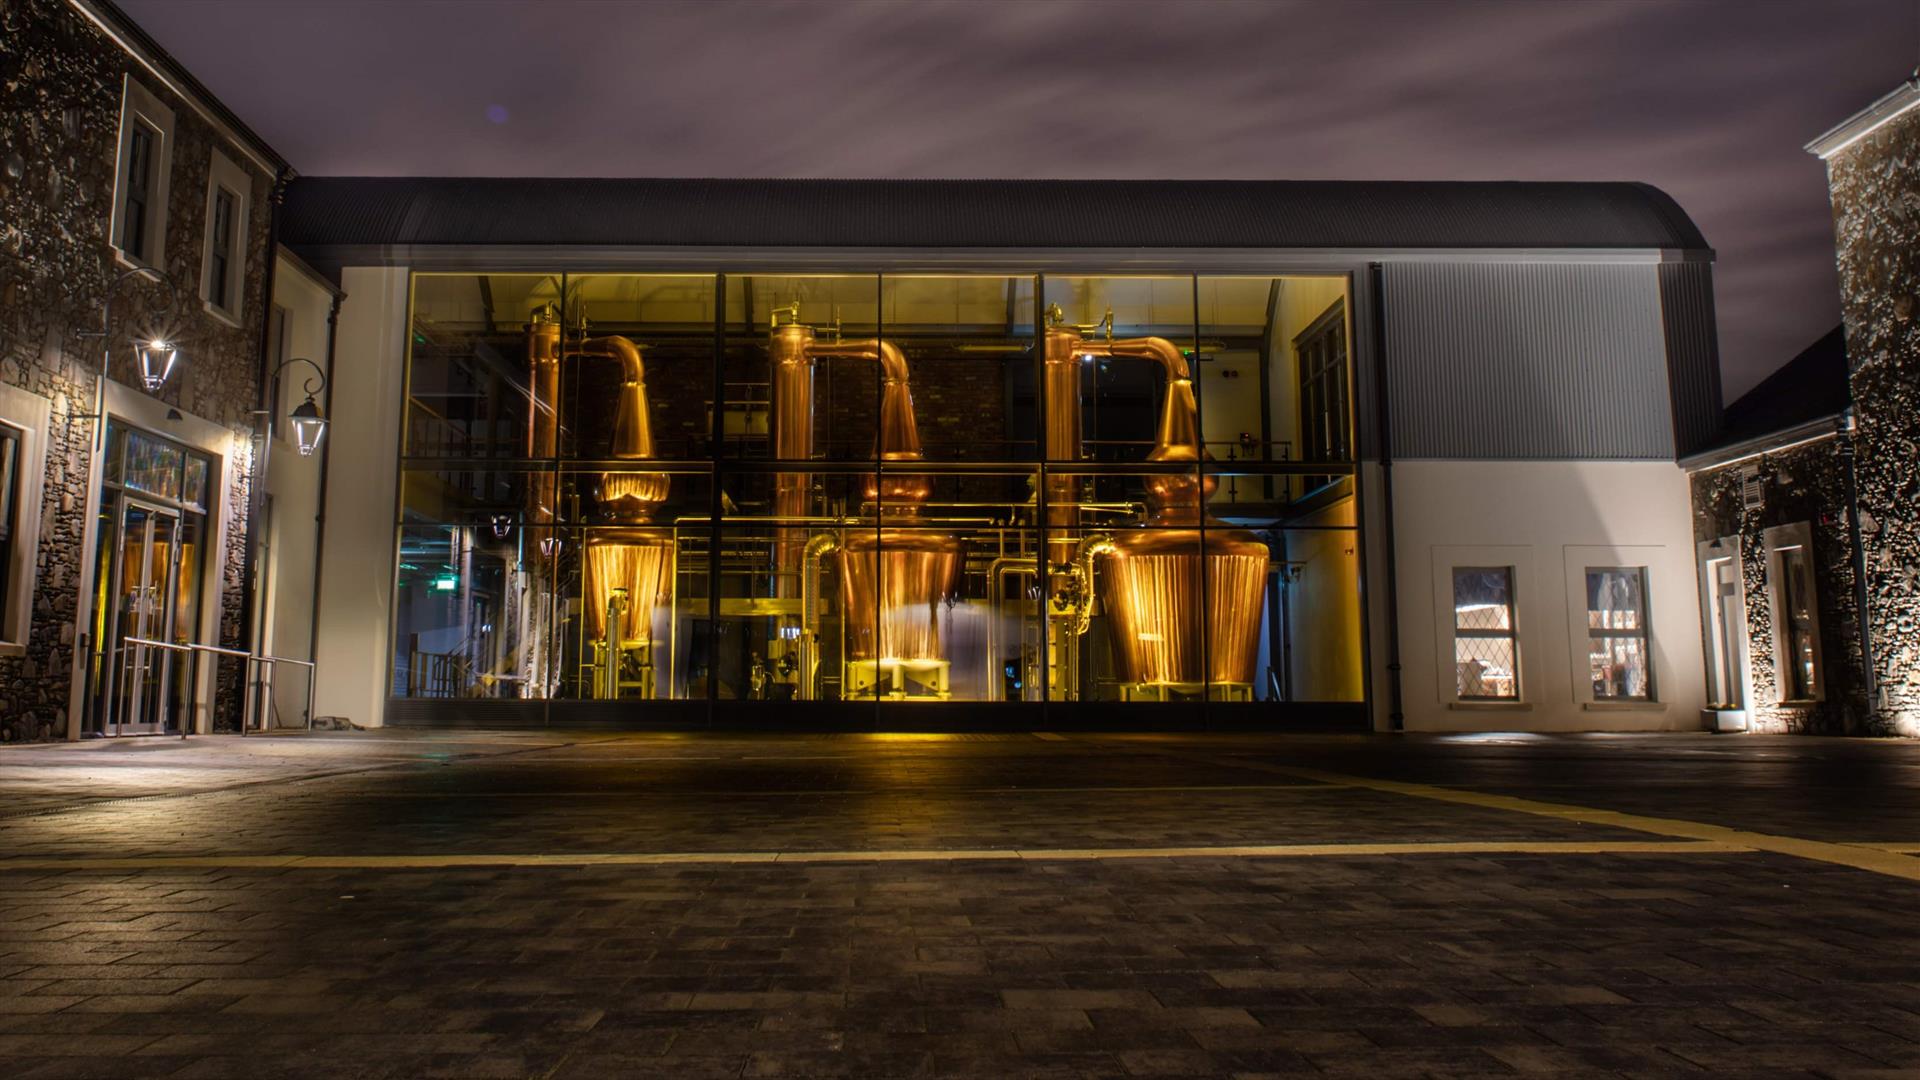 View of the distillery at night across the courtyard